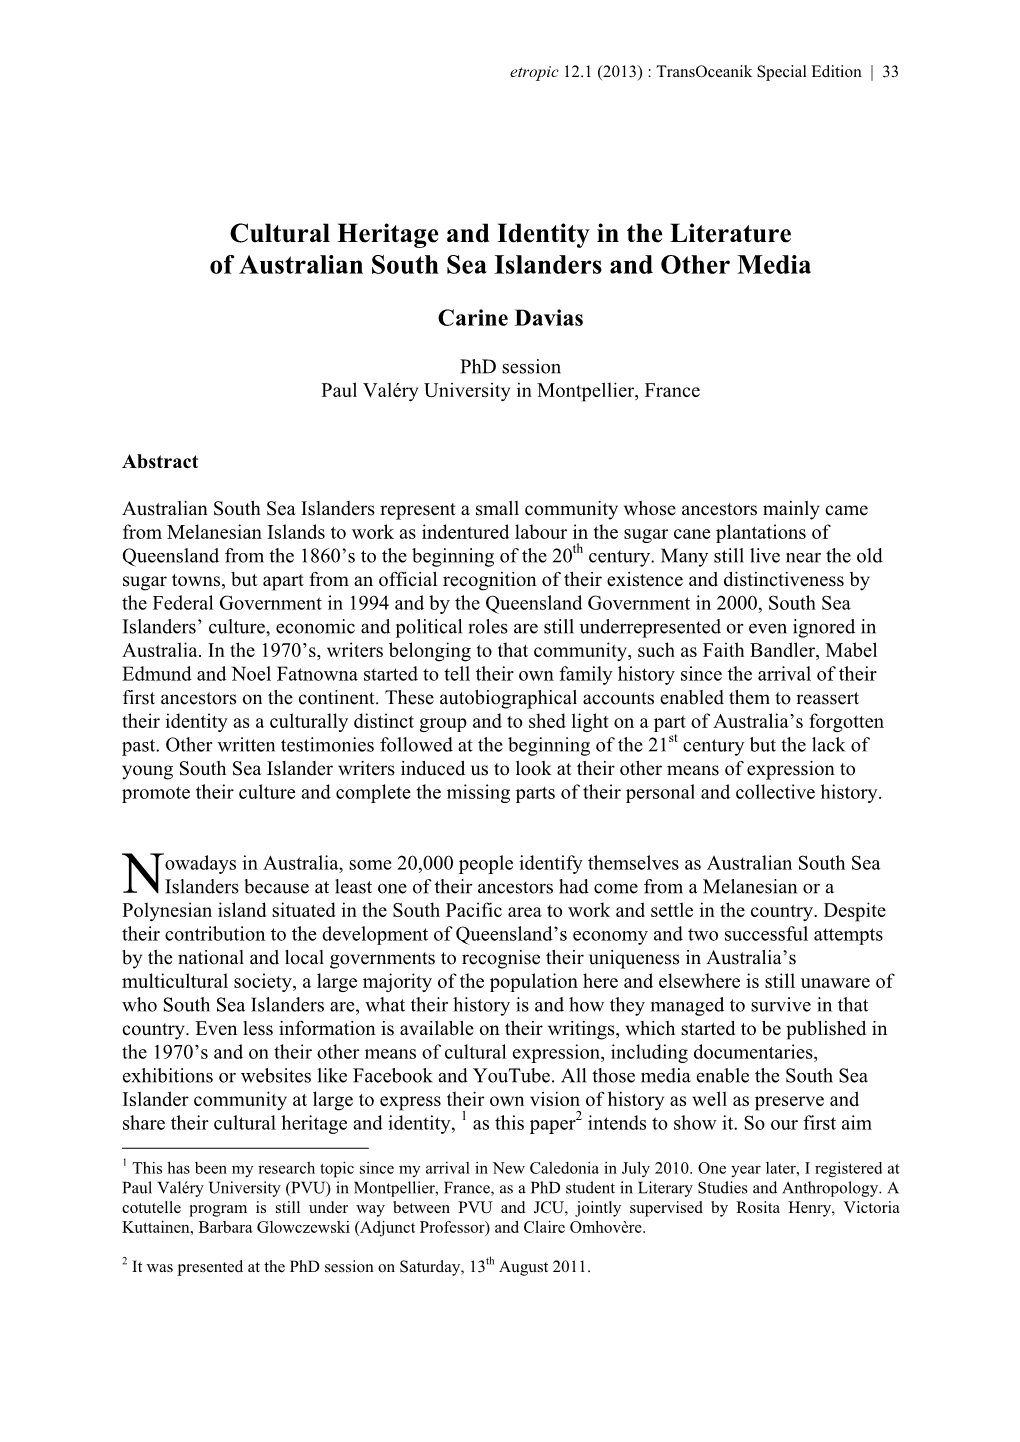 Cultural Heritage and Identity in the Literature of Australian South Sea Islanders and Other Media